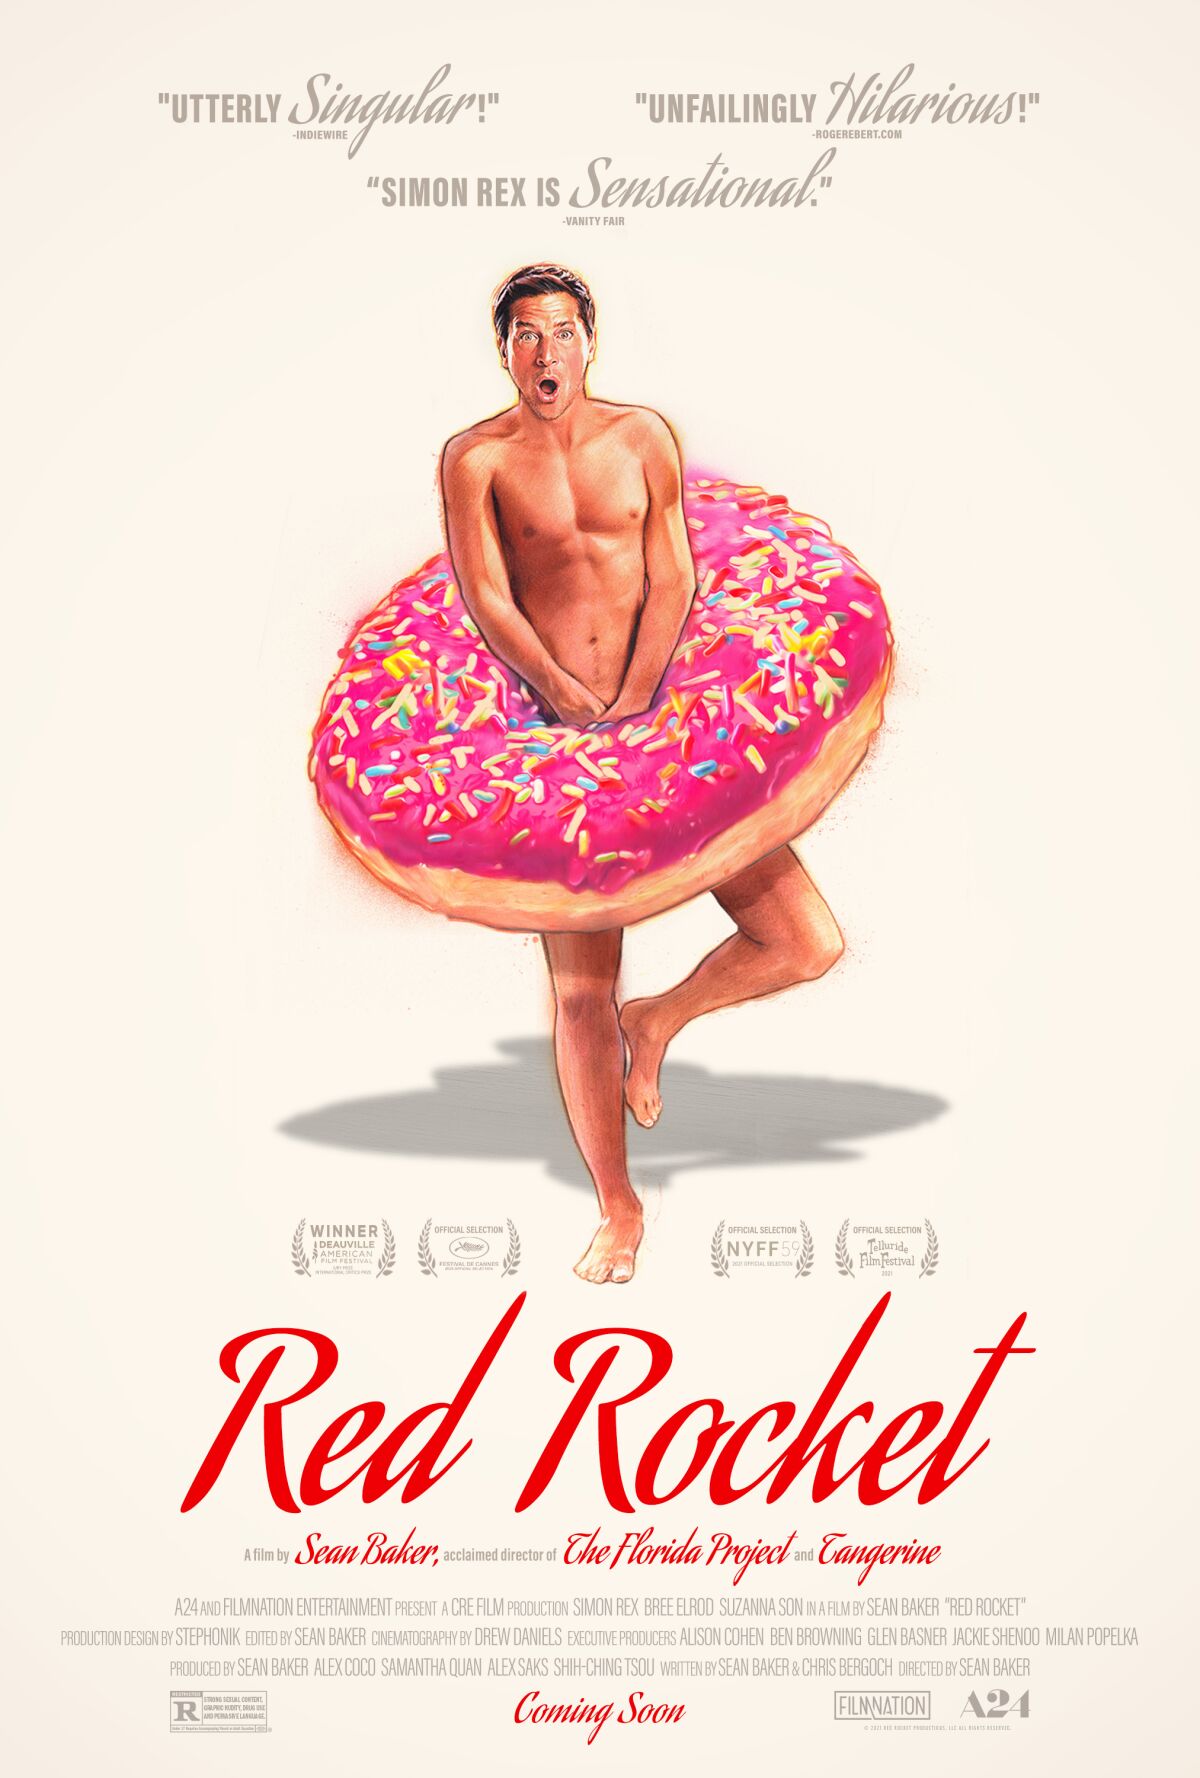 "Red Rocket," from director Sean Baker, premiered in competition at the Cannes Film Festival.